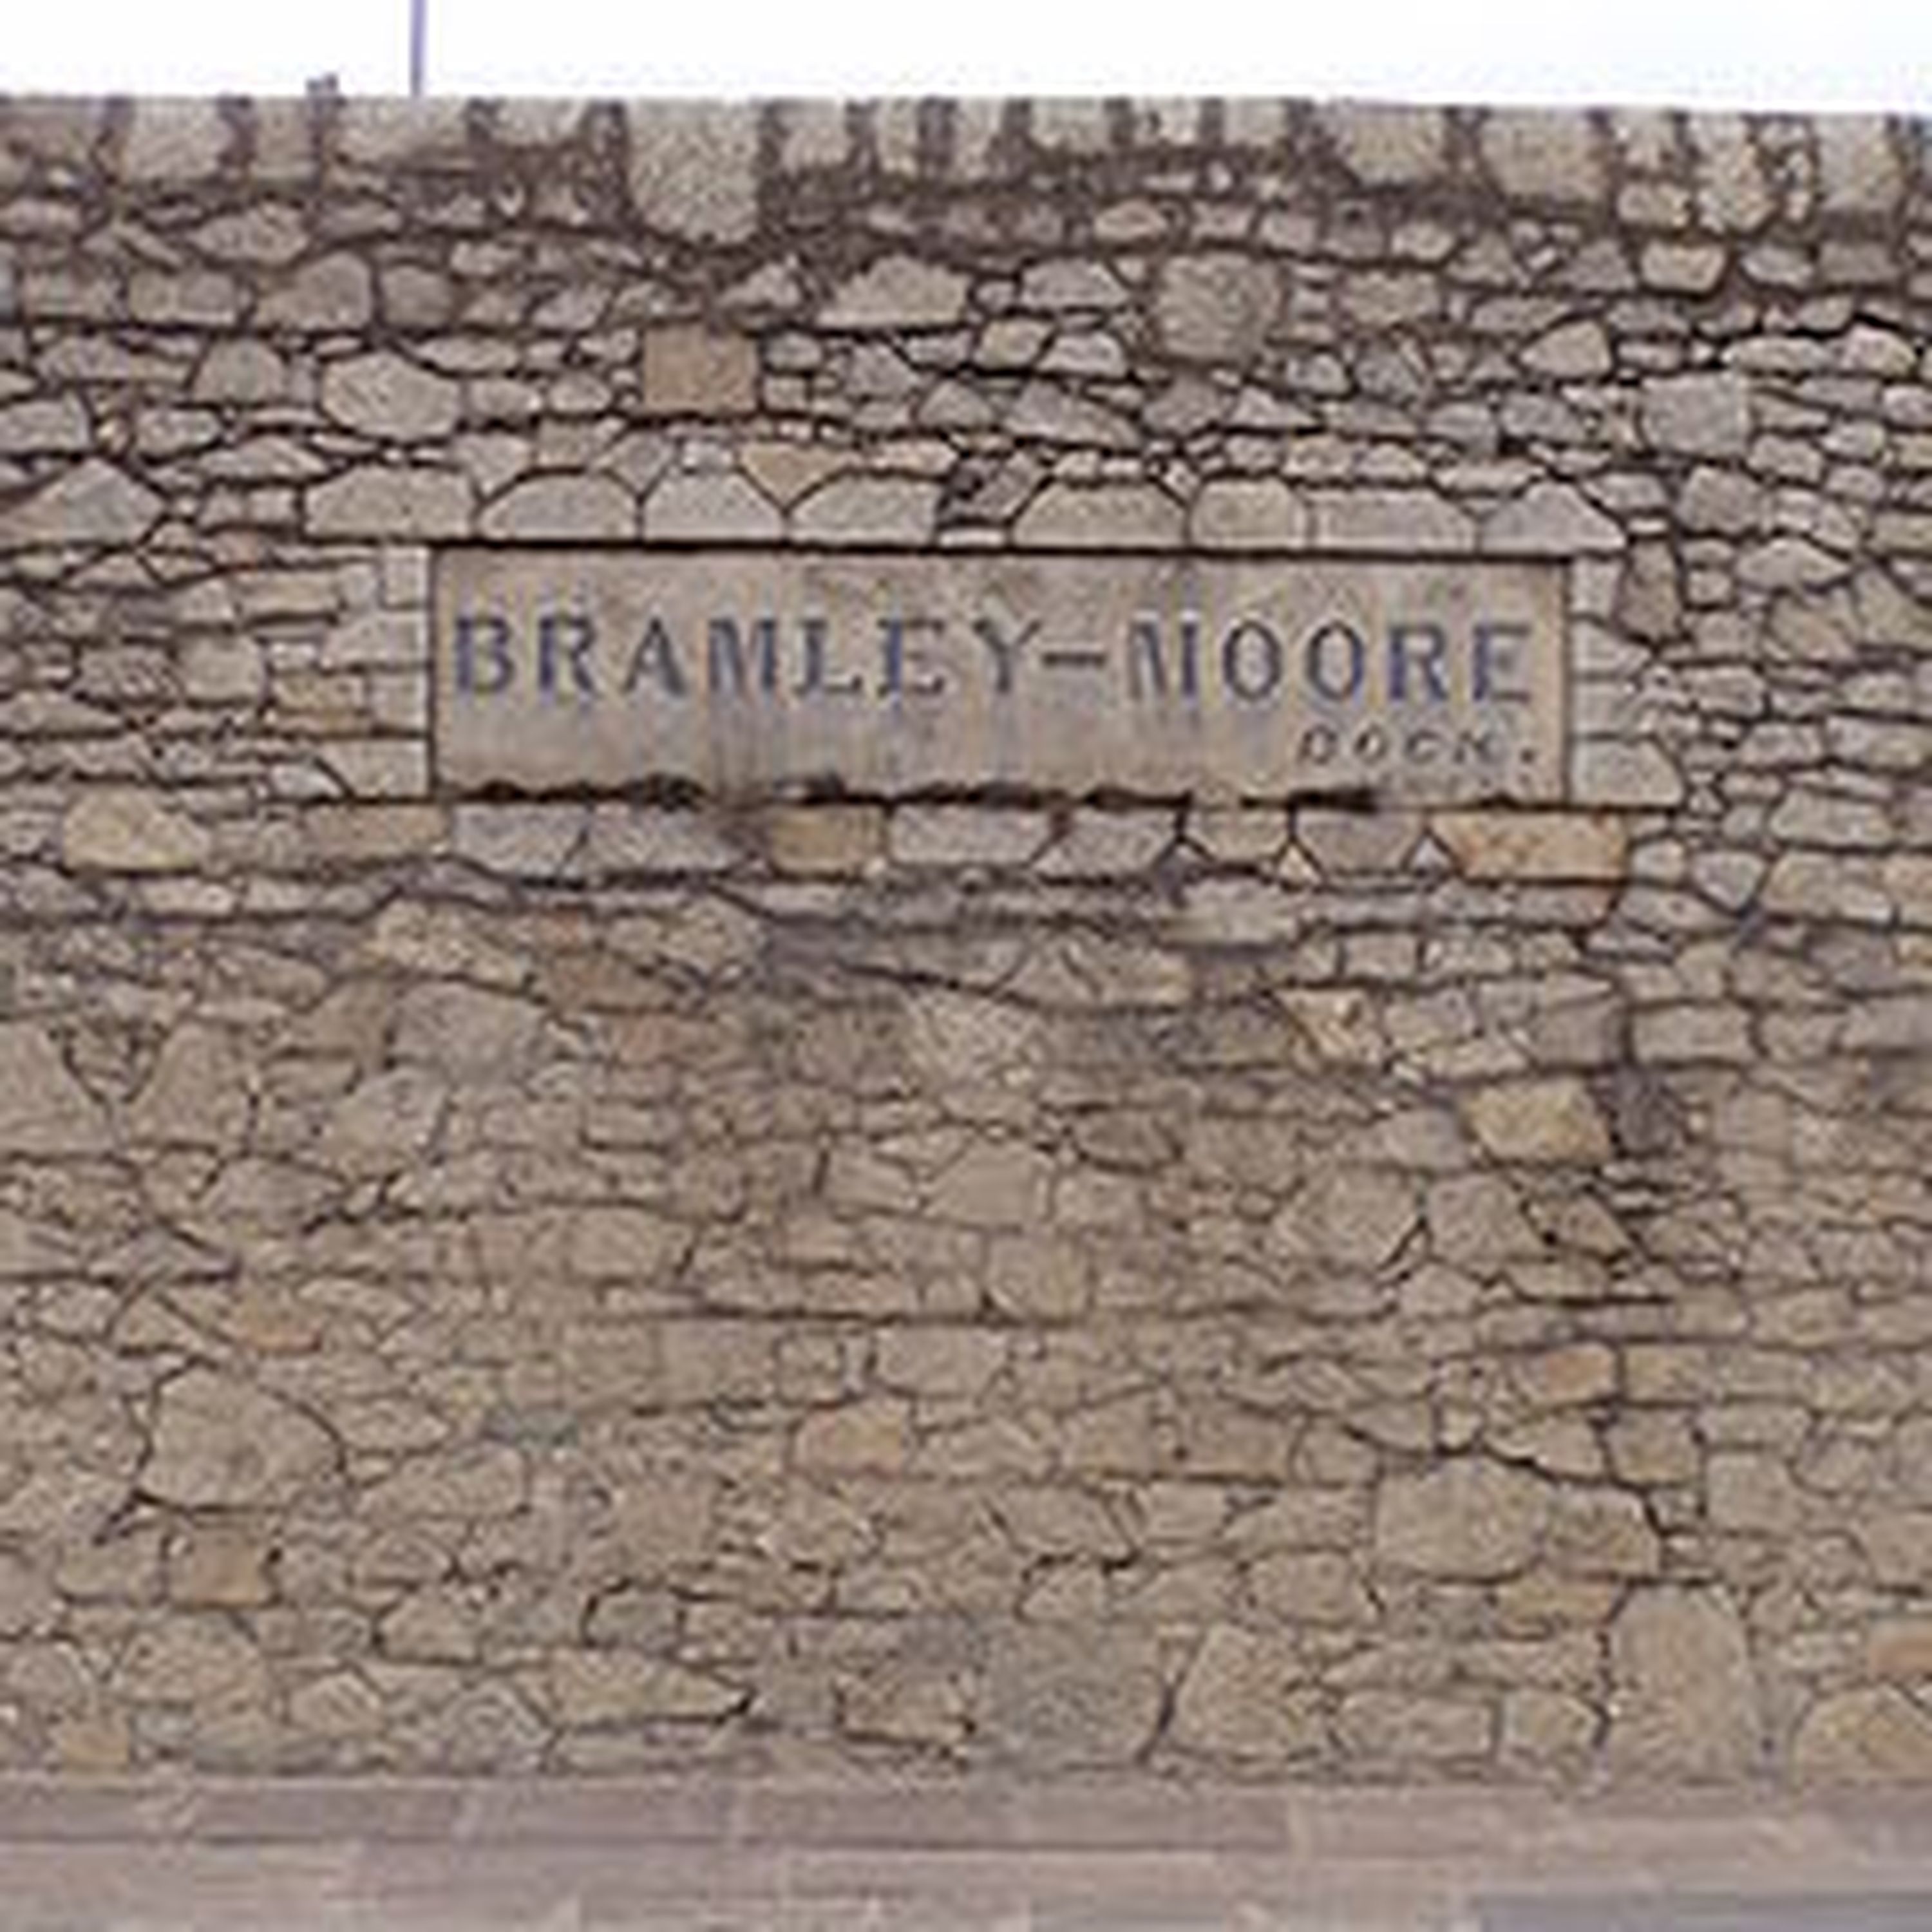 cover art for Episode 45: Bramley Moore Special